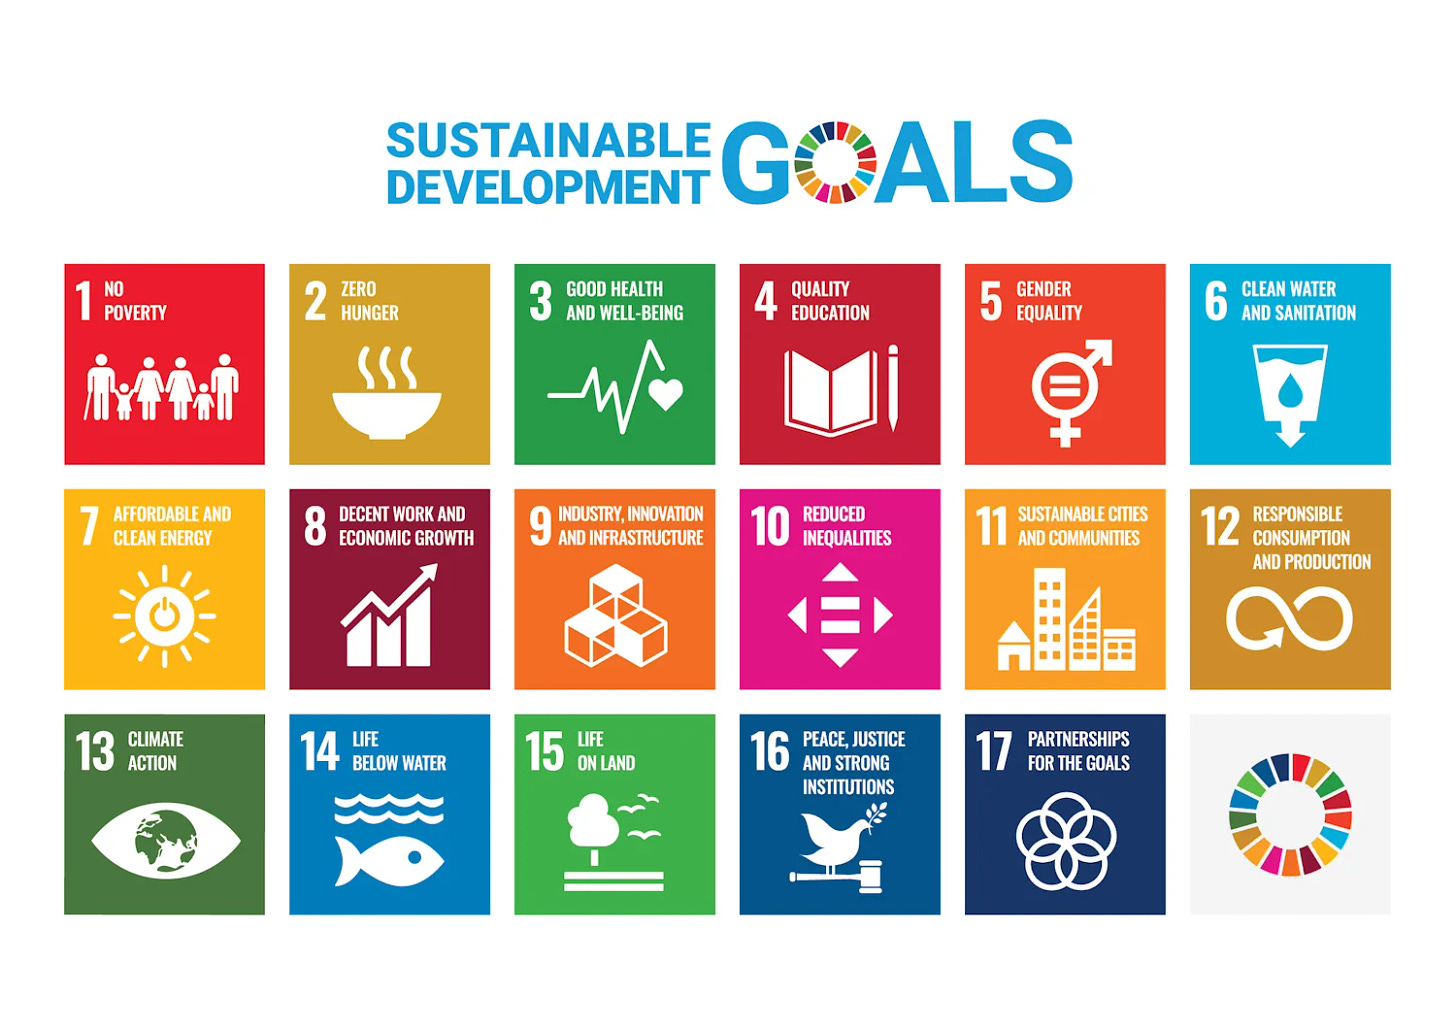 A poster that features icons and text representative of each of the 17 UN Sustainable Development Goals.